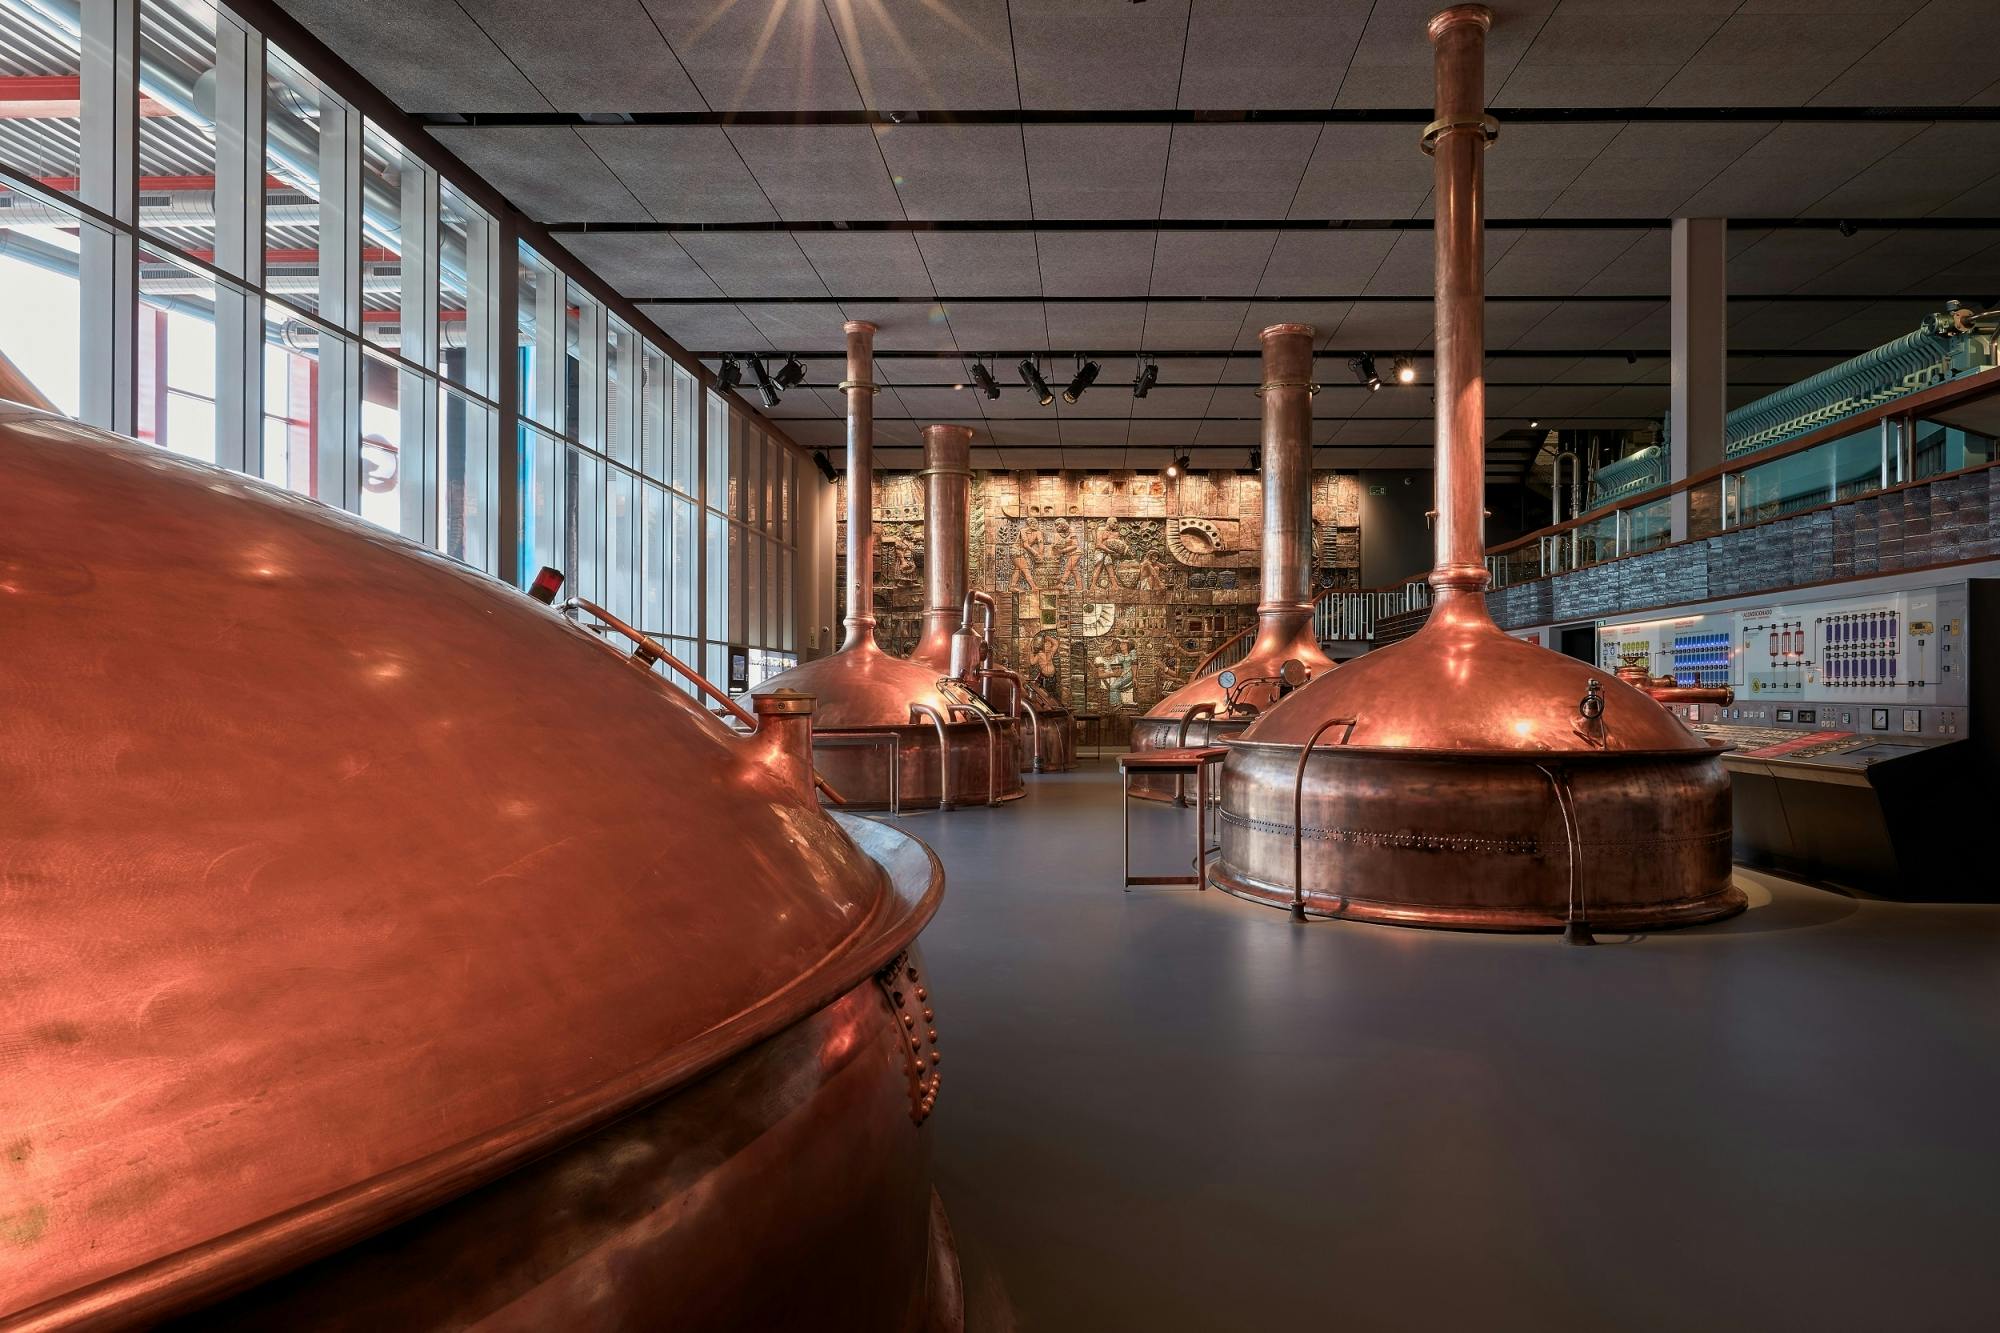 Estrella Galicia Museum guided tour with beer and cured meat tasting